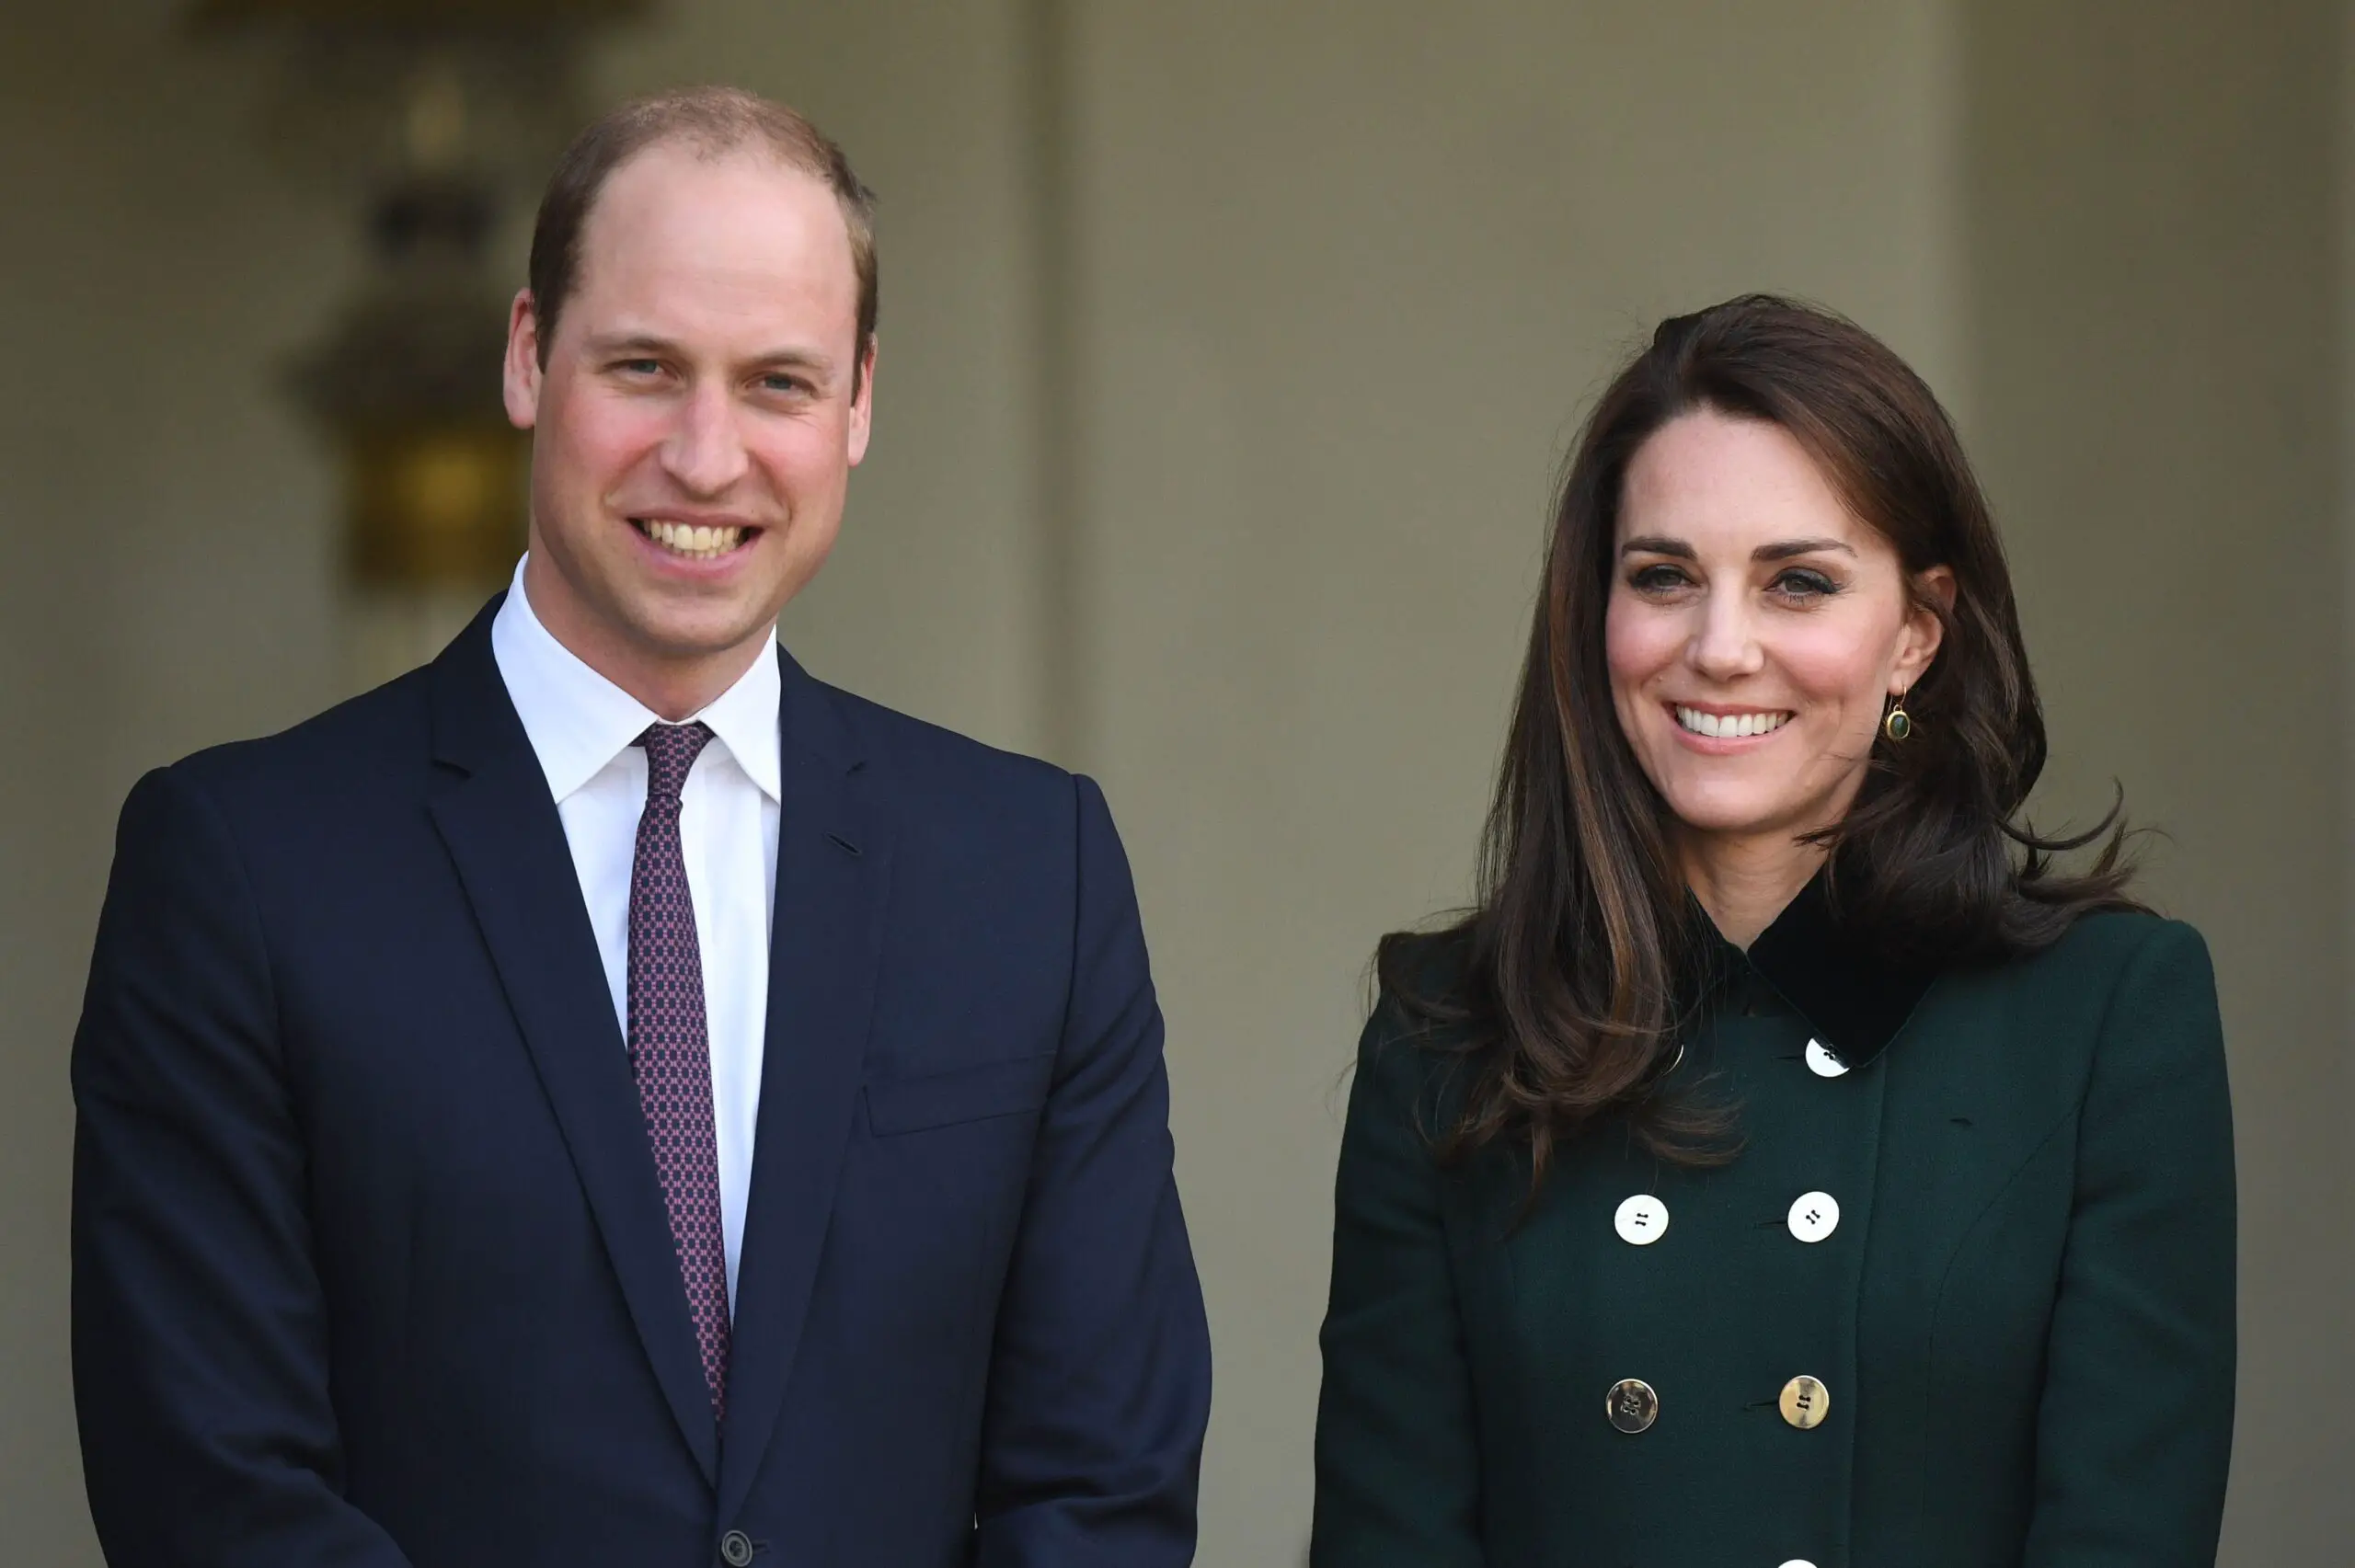 The Duke and Duchess of cambridge are expecting their third child